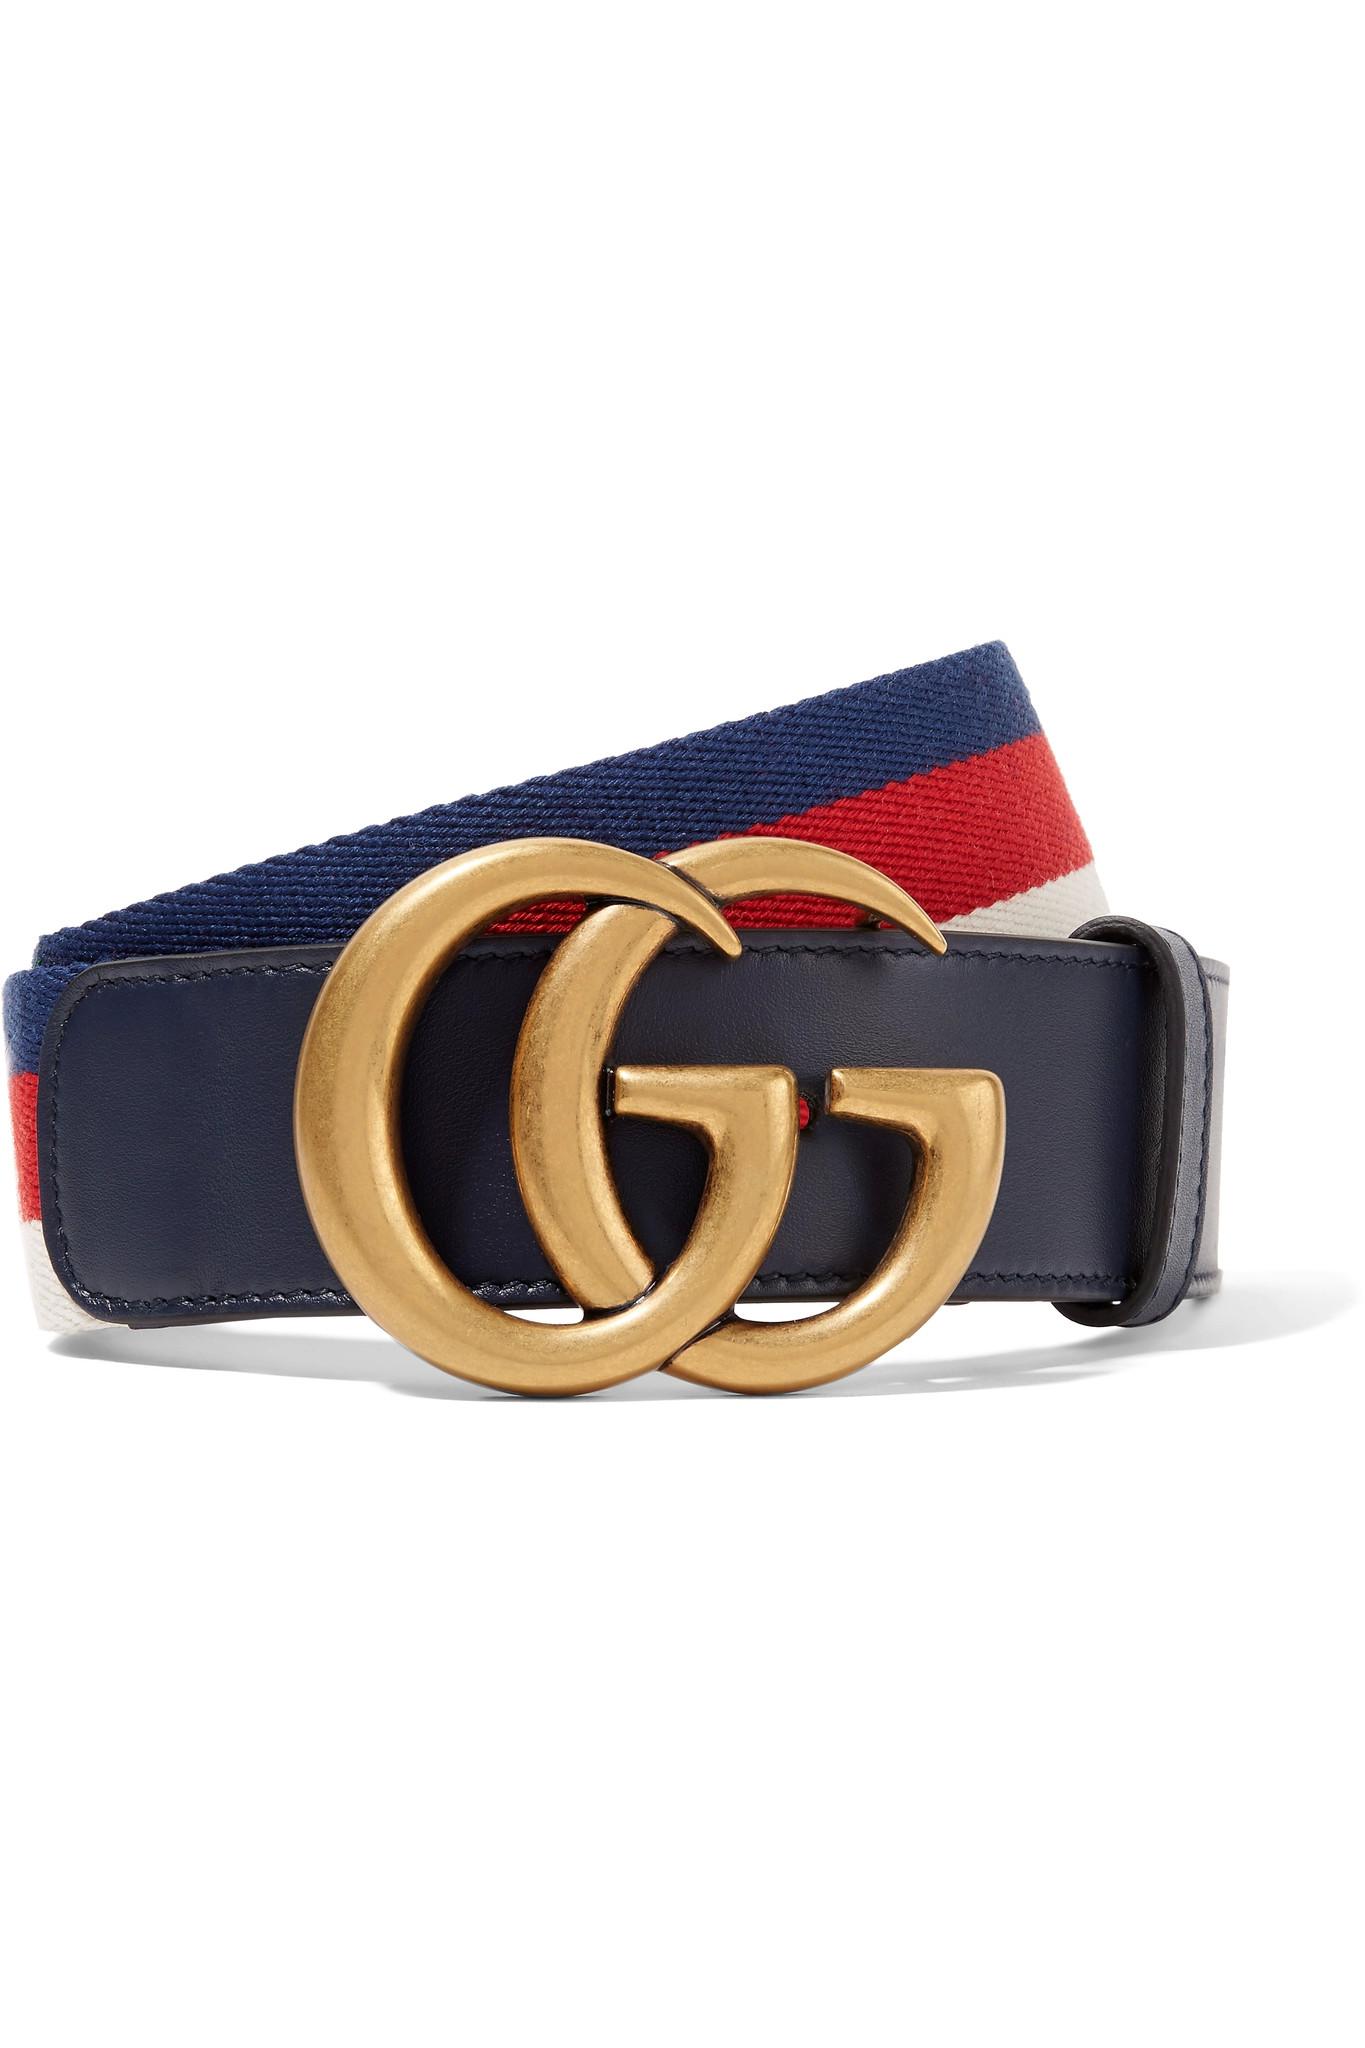 Gucci Striped Canvas And Leather Belt in Blue - Lyst